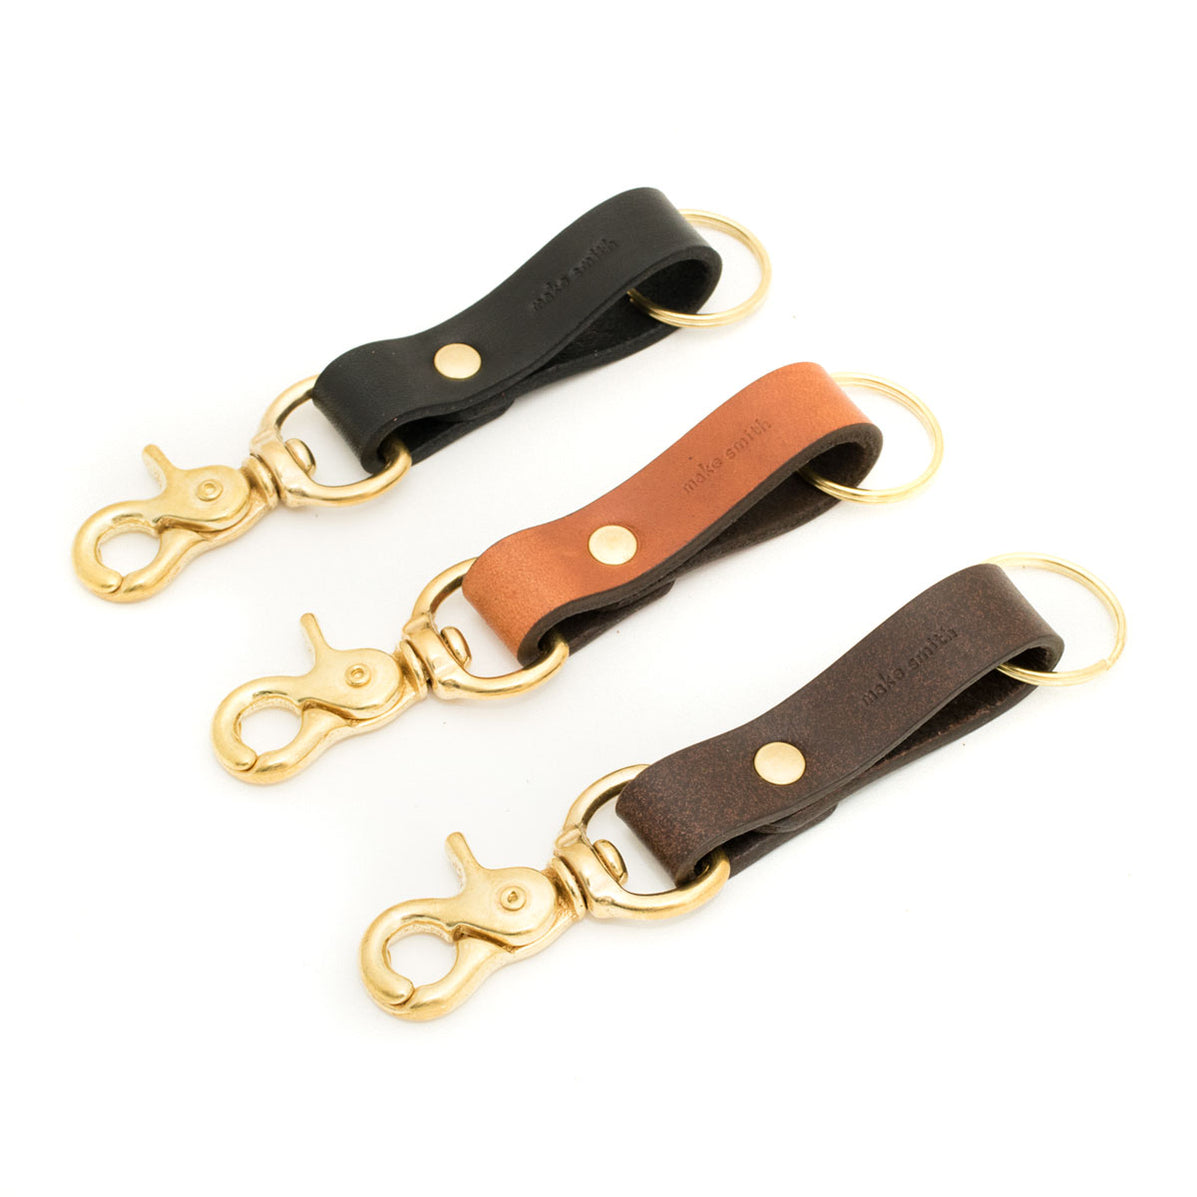 LEATHER KEY CHAIN WITH CLIP :: Handmade in the USA by Make Smith ...